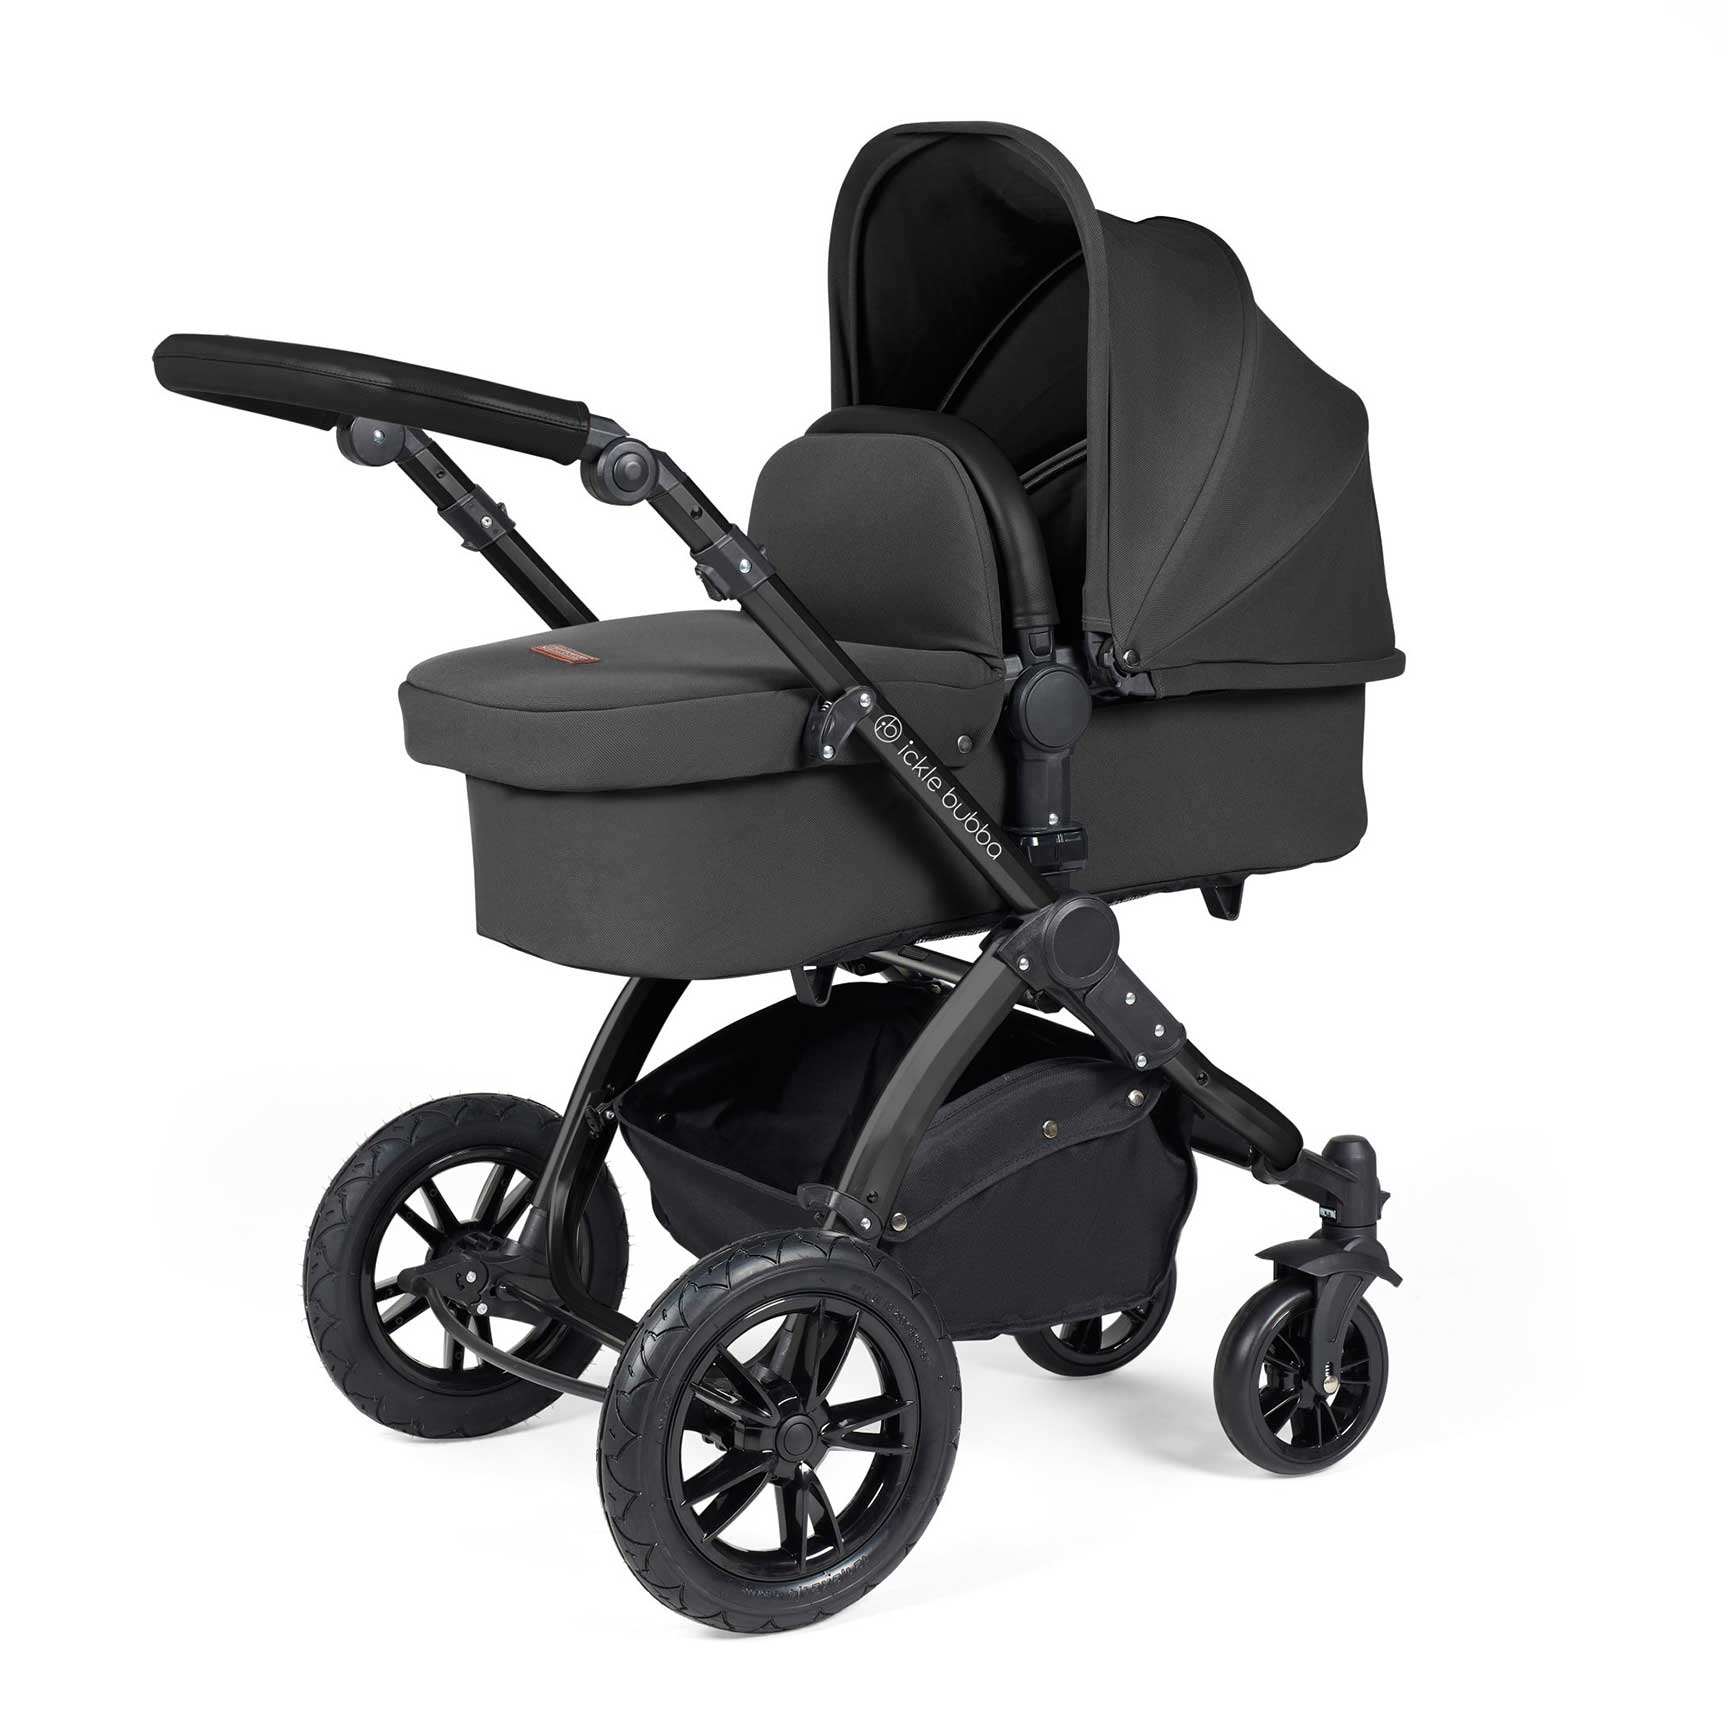 Ickle Bubba travel systems Ickle Bubba Stomp Luxe 2 in 1 Plus Pushchair & Carrycot - Black/Charcoal Grey/Black 10-003-001-206